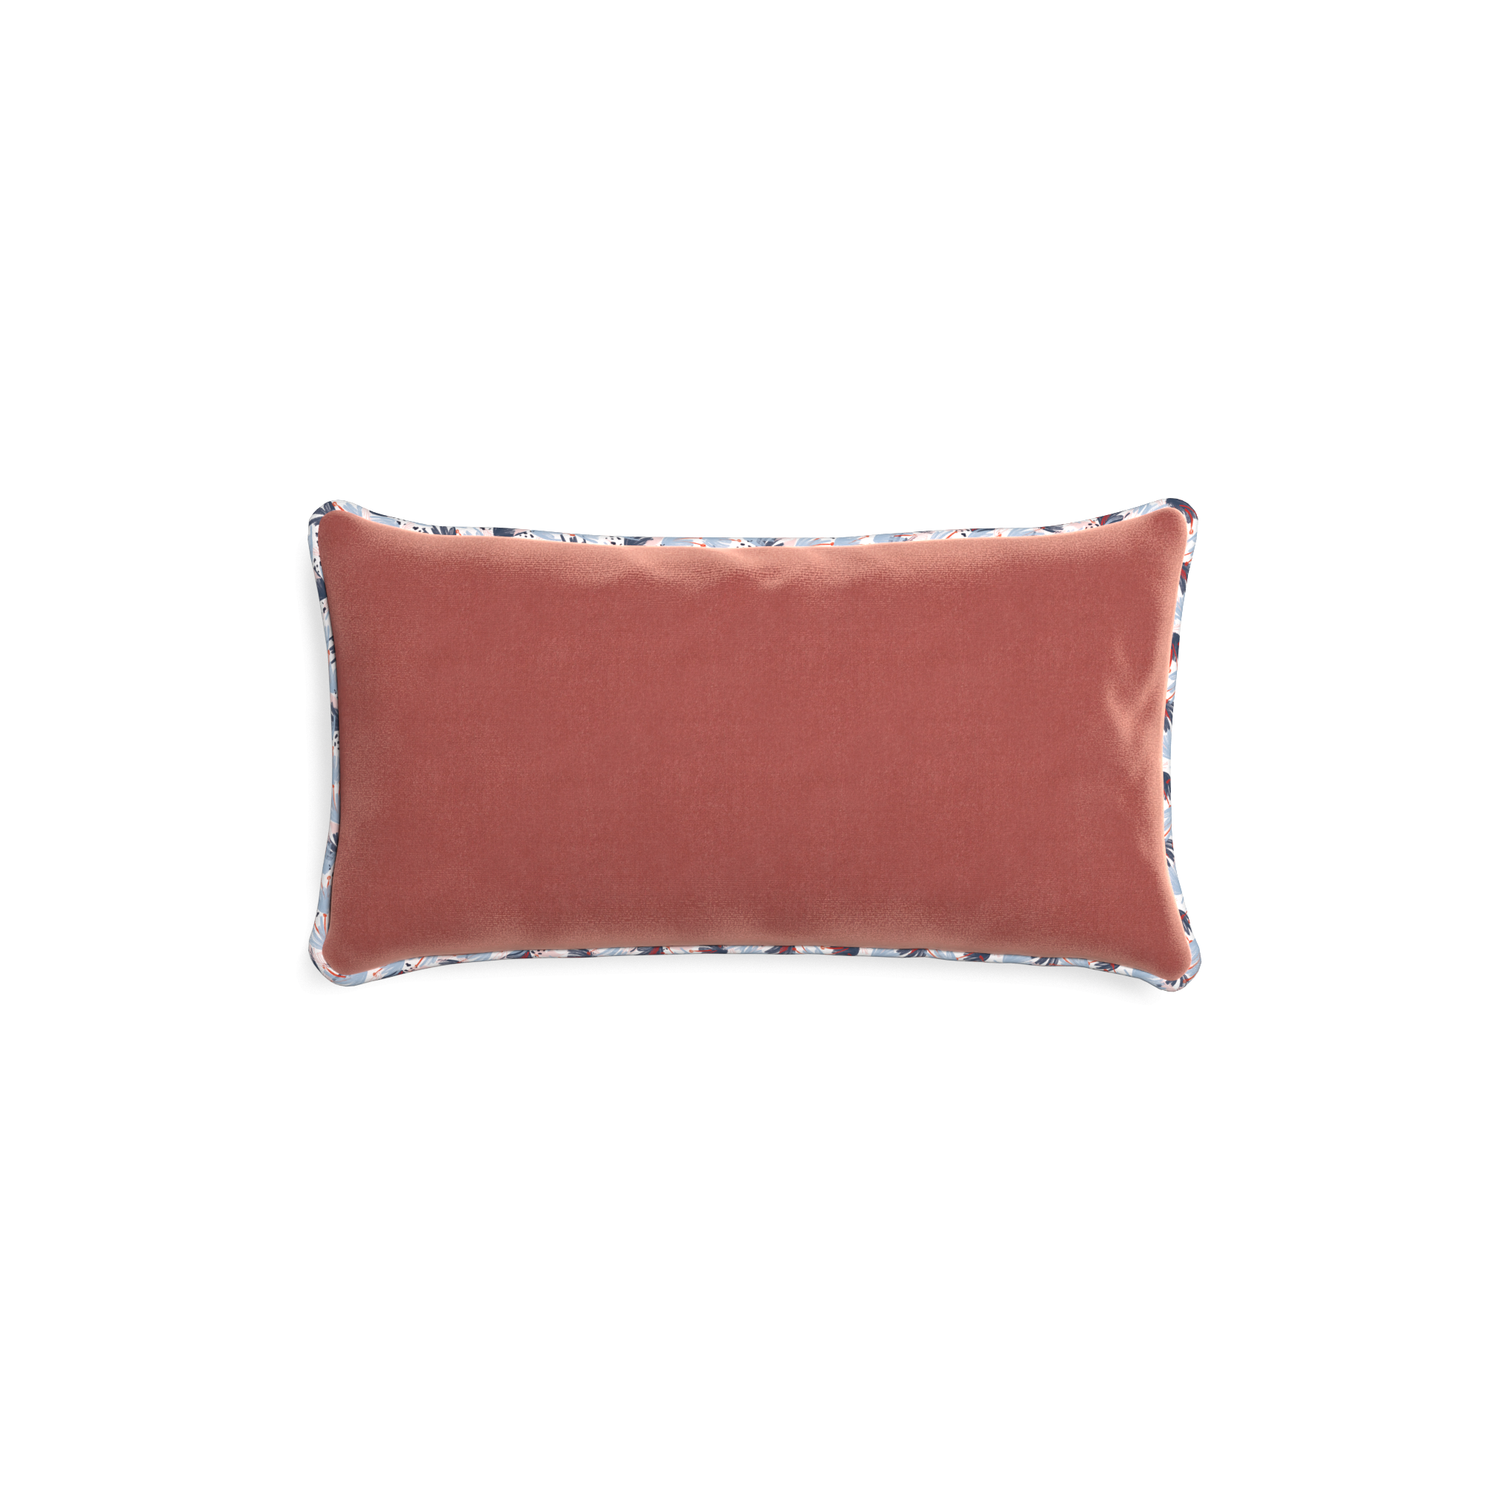 rectangle coral velvet pillow with red and blue piping